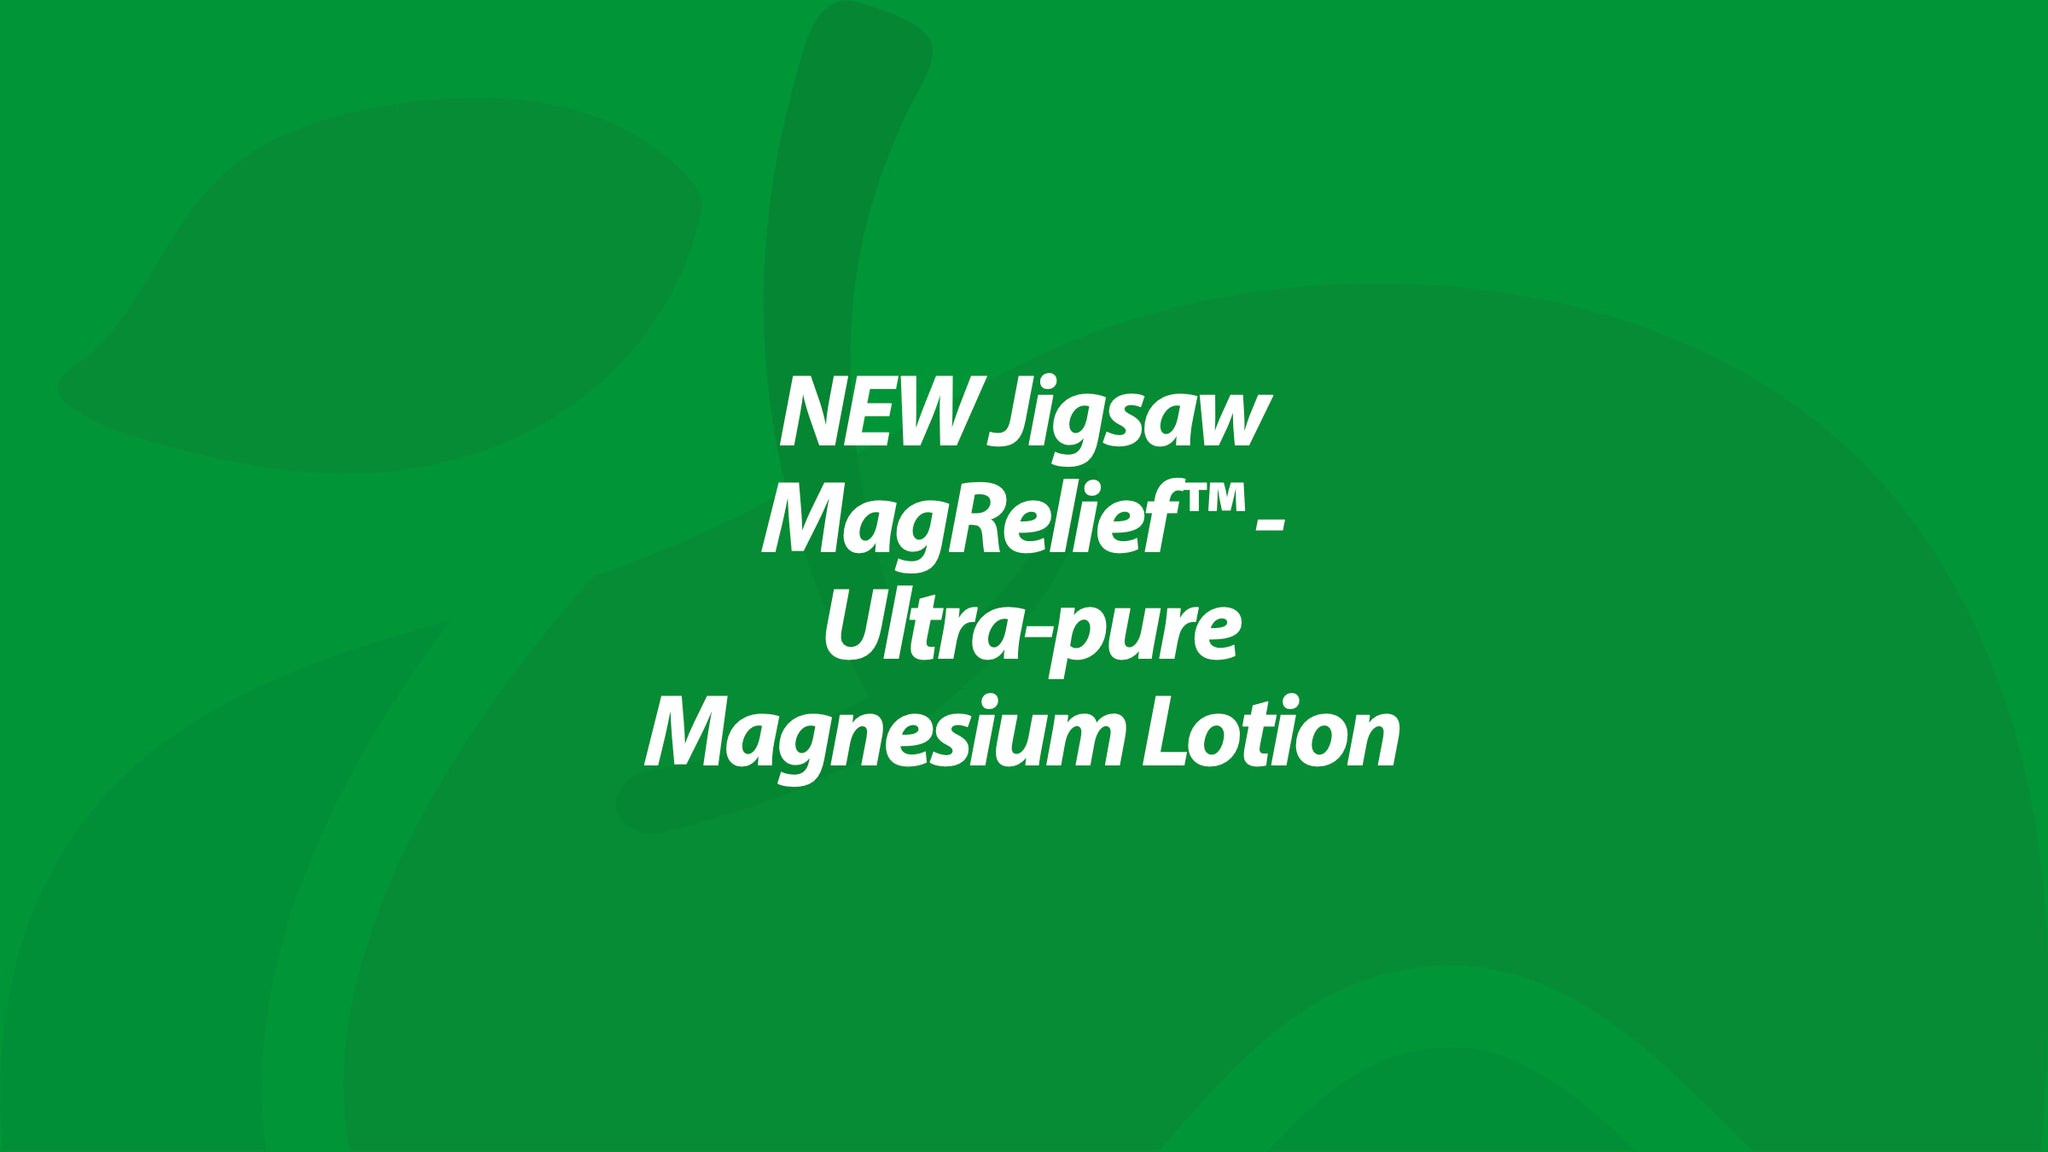 NEW Jigsaw MagRelief™ - Ultra-pure Magnesium Lotion